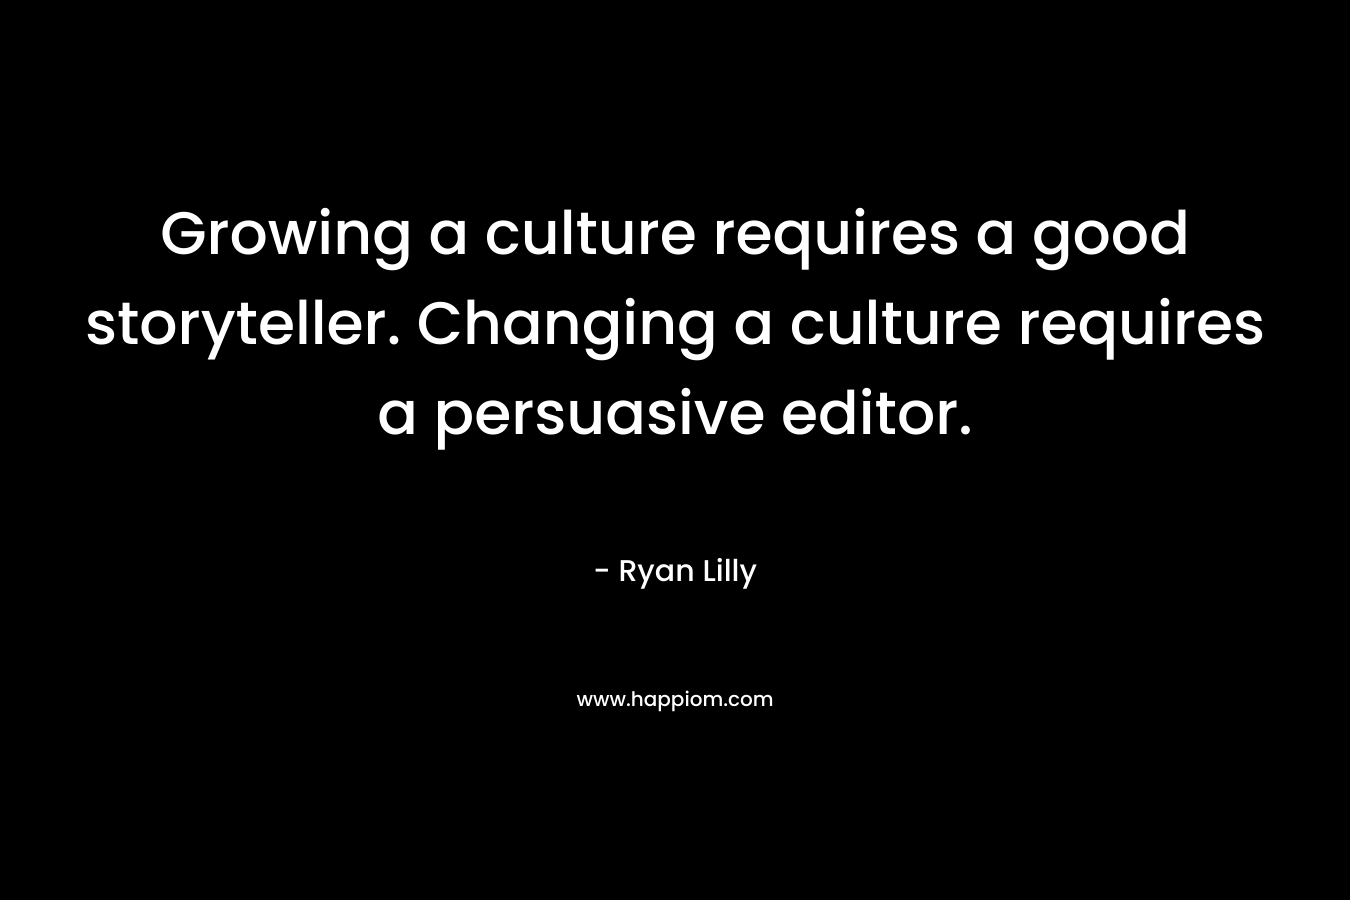 Growing a culture requires a good storyteller. Changing a culture requires a persuasive editor. – Ryan Lilly